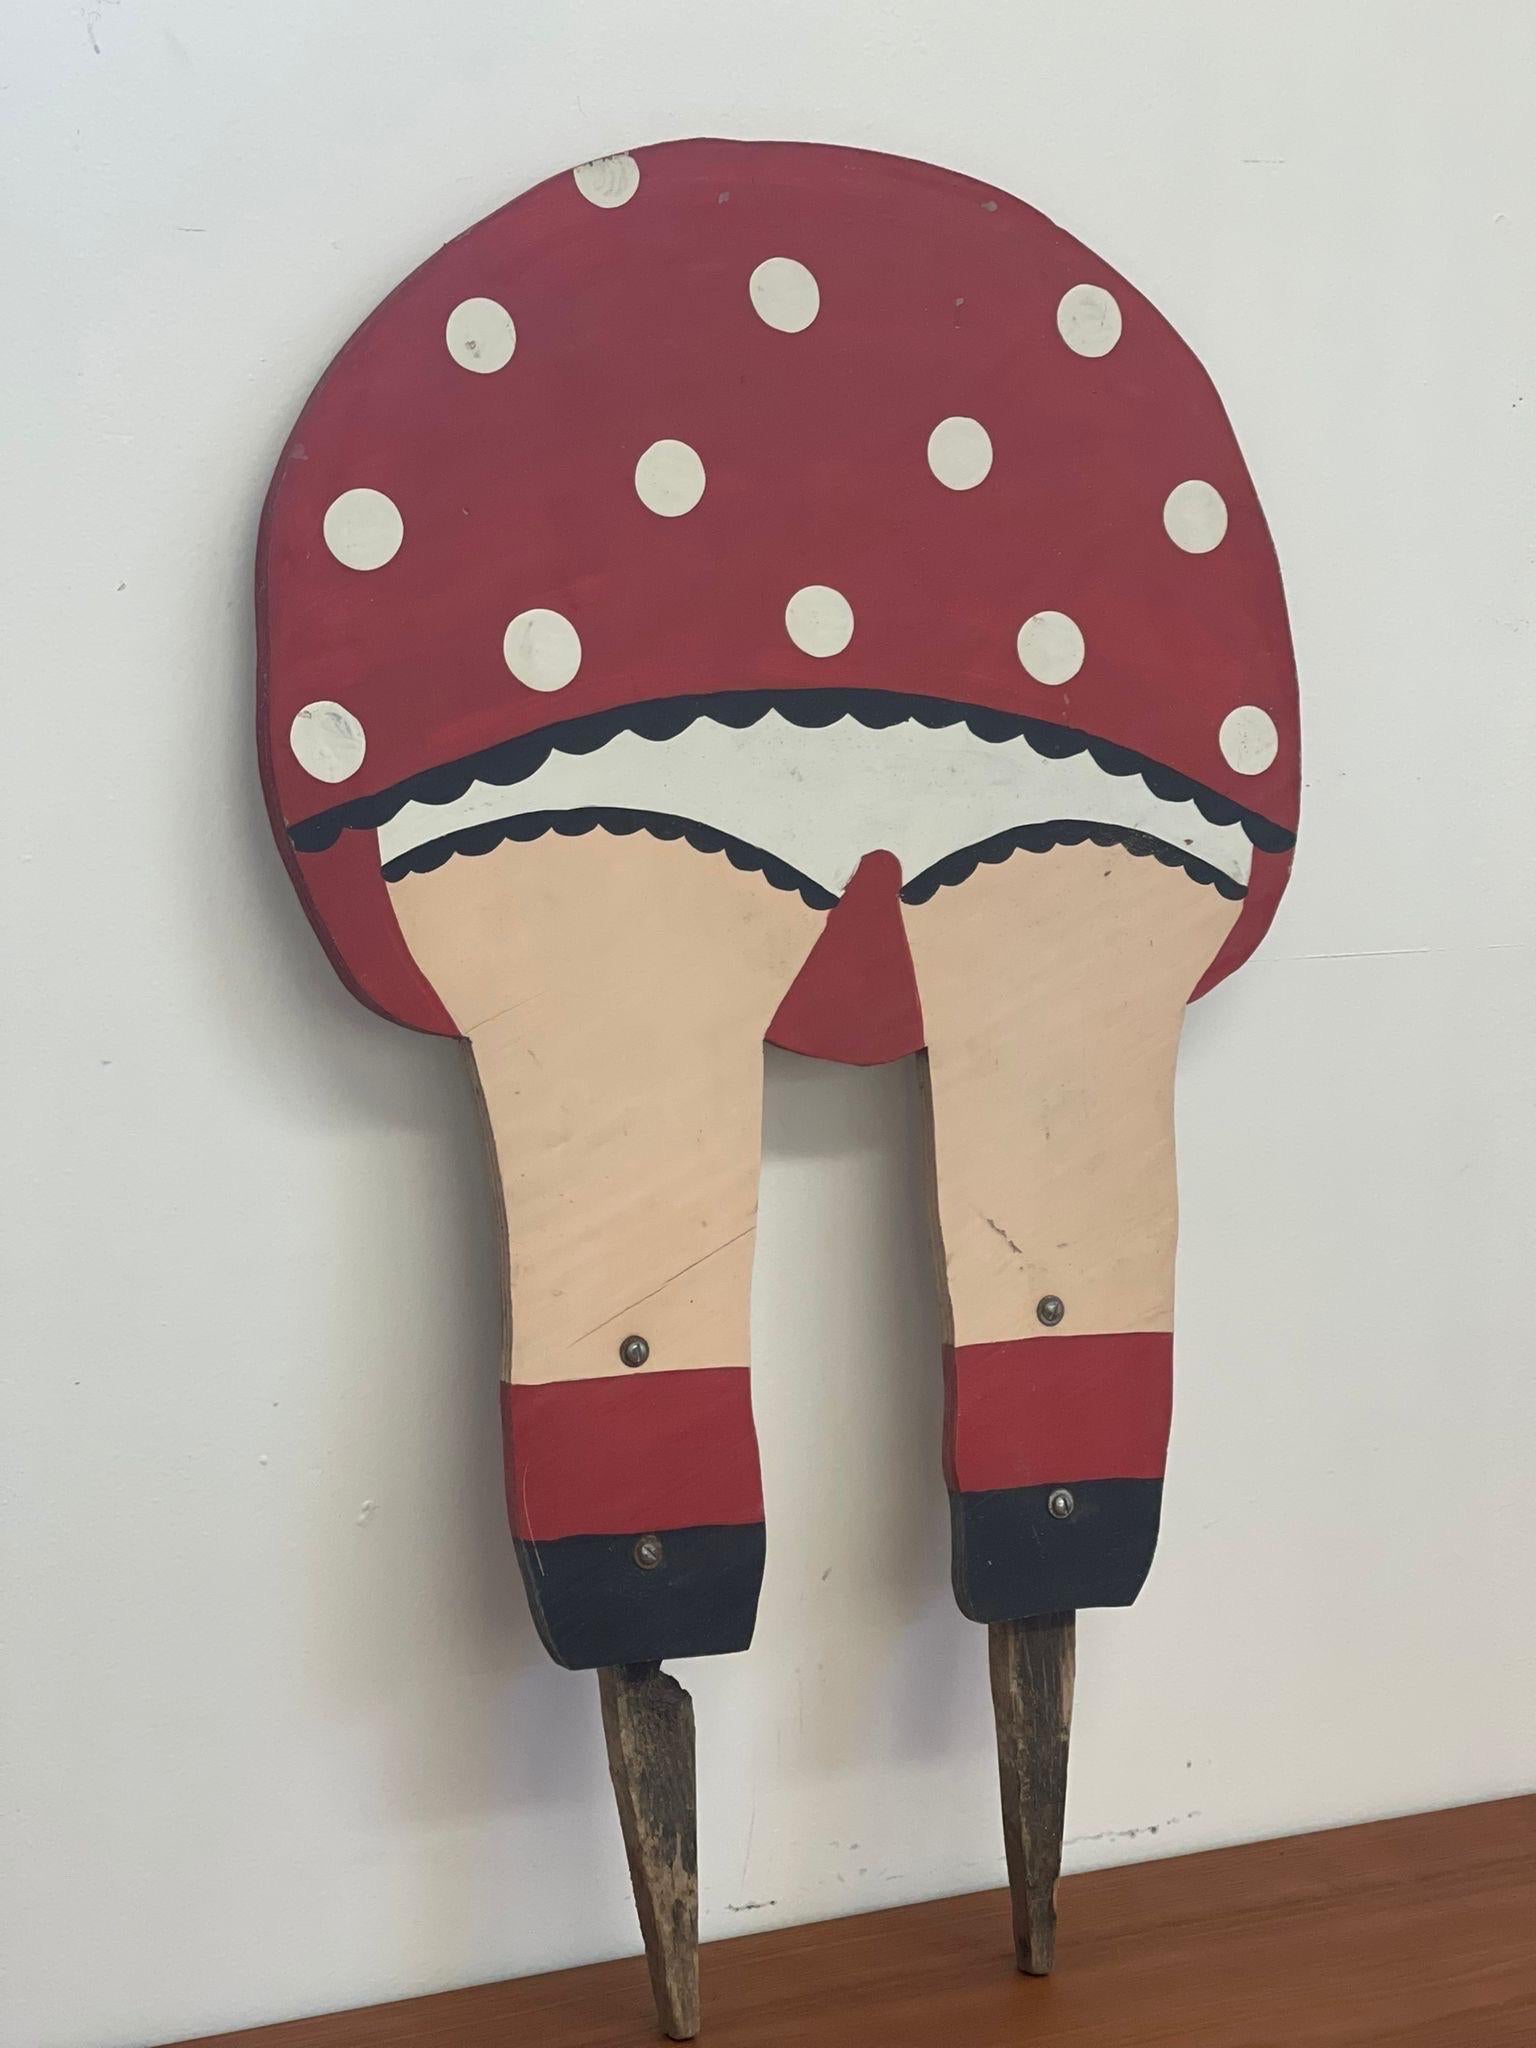 Red and White Spotted Mushroom Garden Decoration . No Makers Mark. Vintage Condition Consistent with Age as Pictured.

Dimensions. 19 W ; 30 H